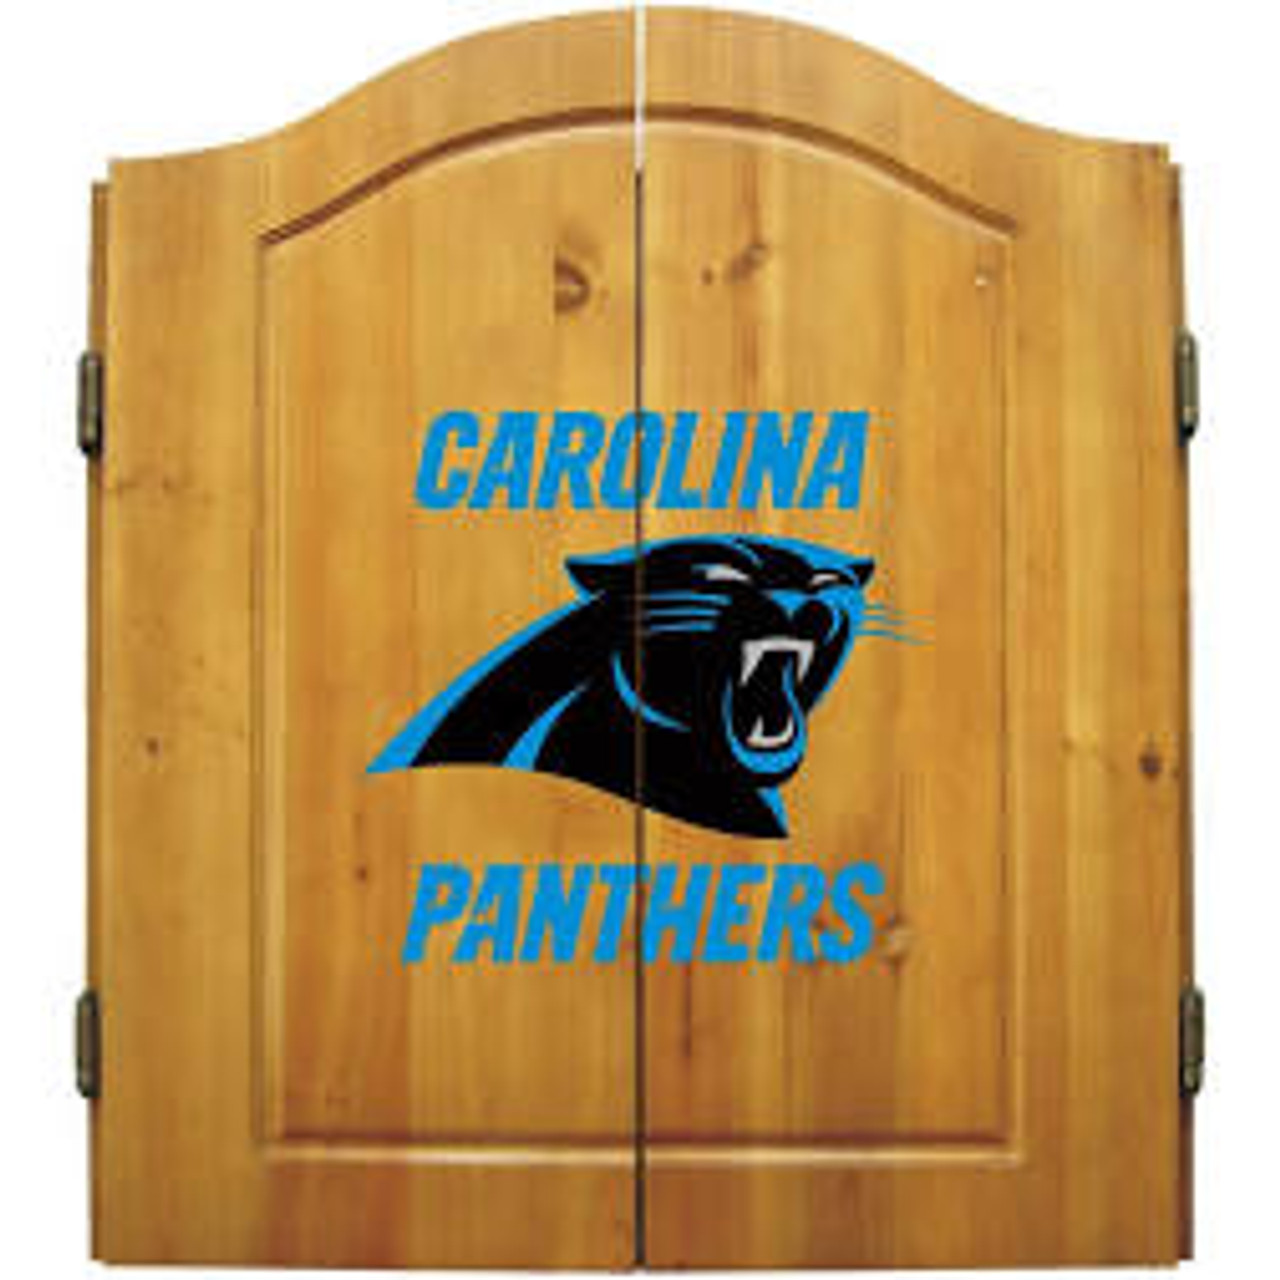 Carolina, panthers, football, Pool, Table, NFL, 8', billiard, table, pool, slate, 1", solid, wood, 3 piece, 3pc, balls, dartboard, accessories, installation, cover, rec warehouse, imperial